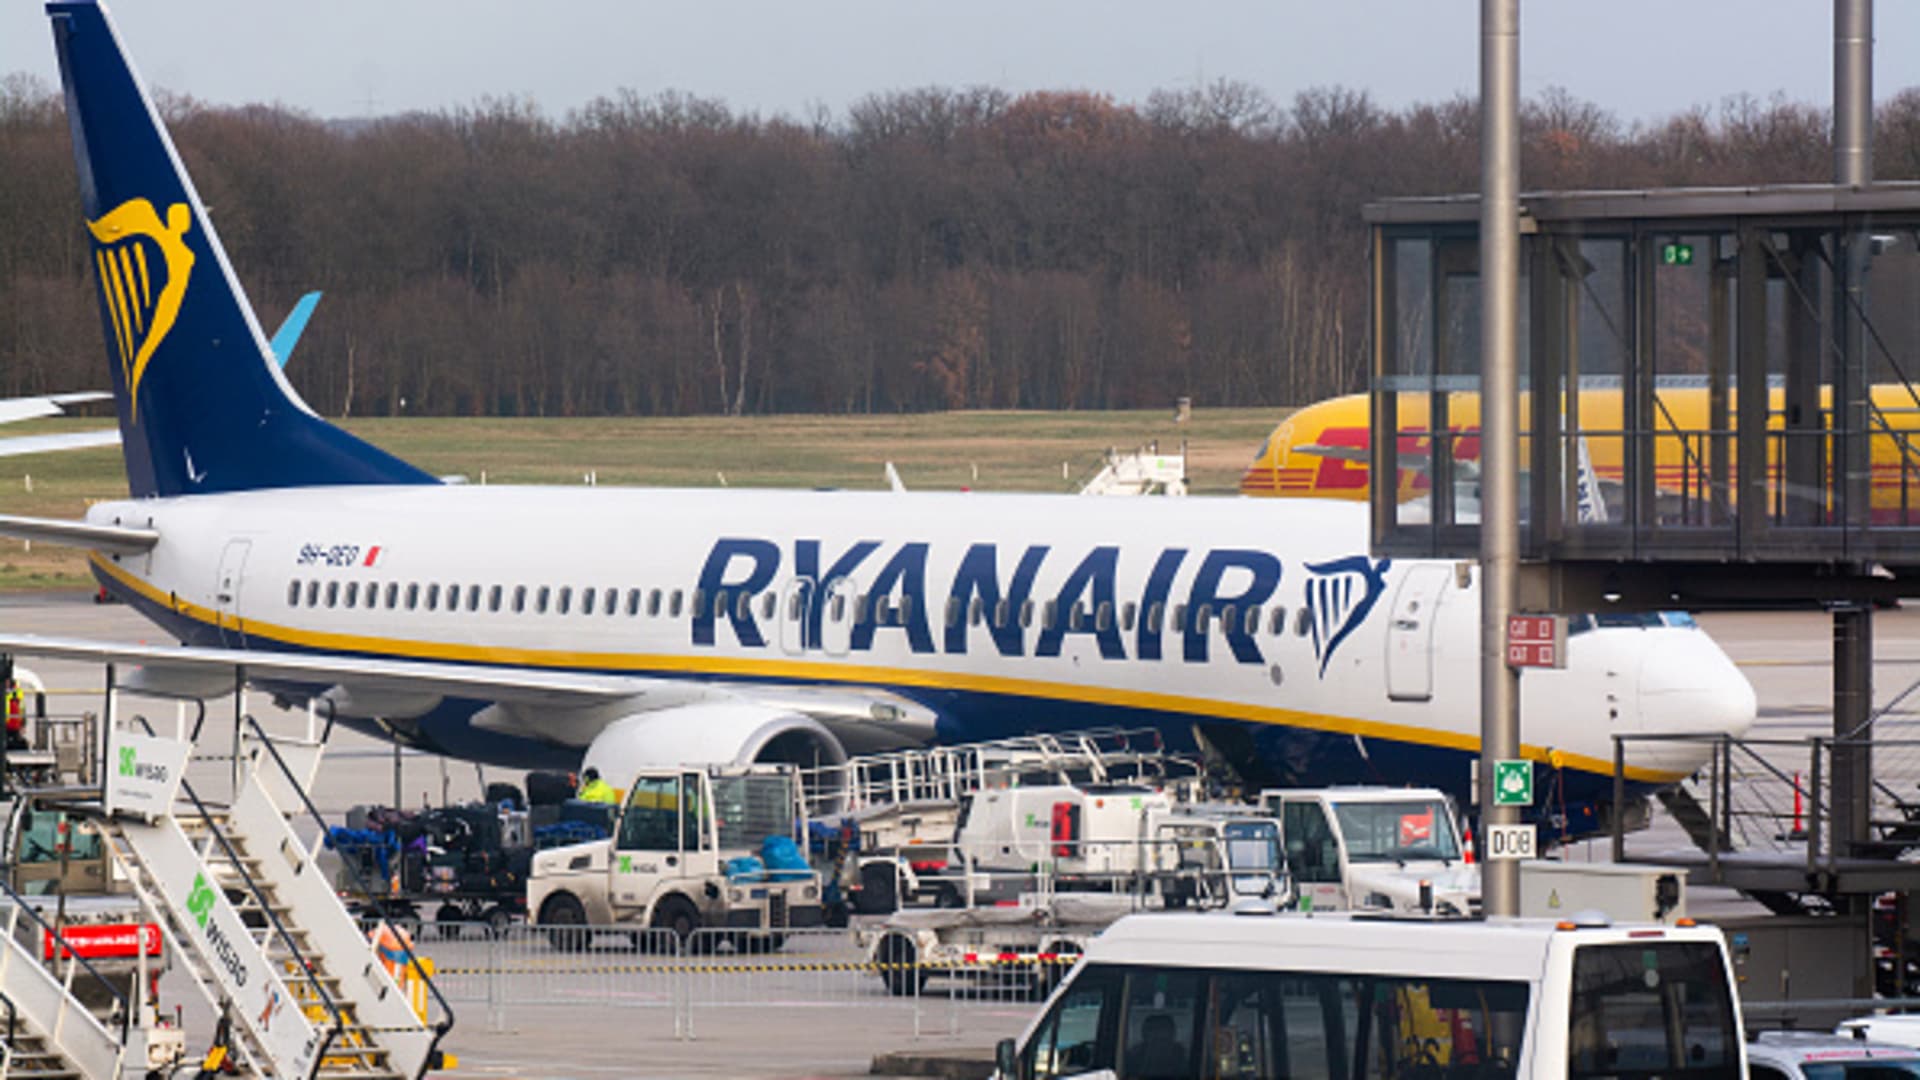 Ryanair reports bumper profit on 'favorable' fuel hedges, sees major industry consolidation